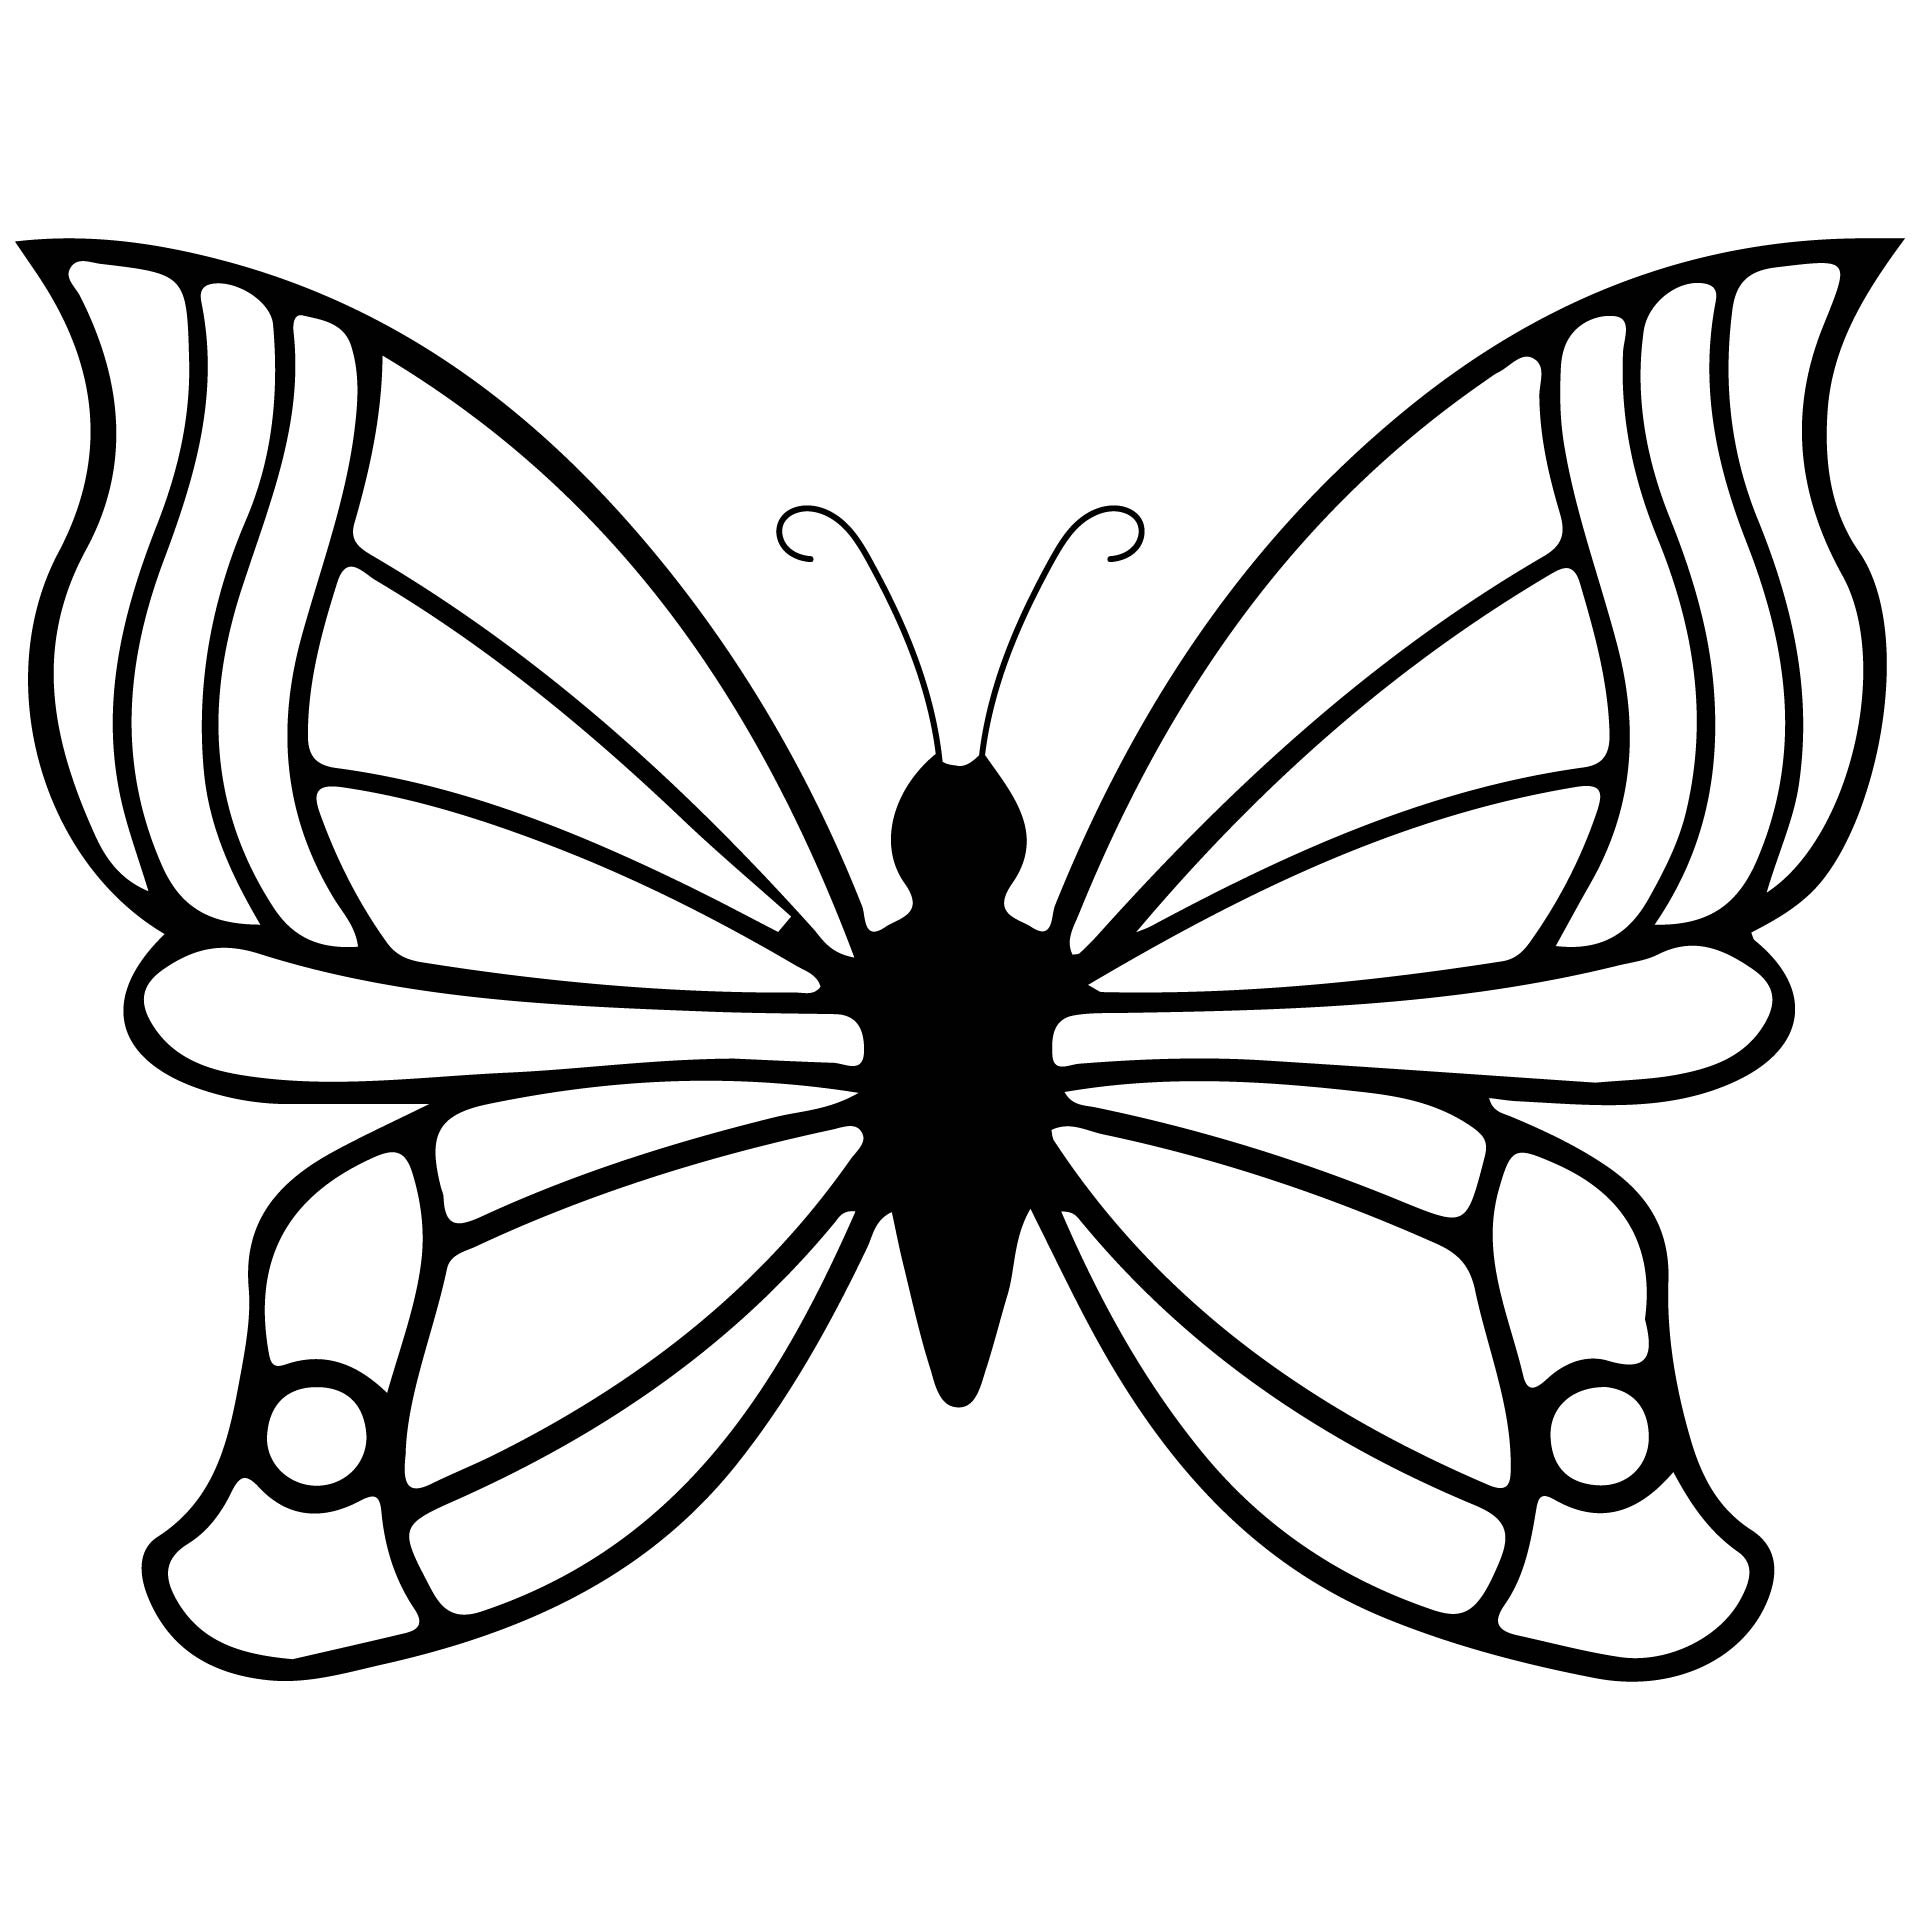 Butterfly Template Free Printable - Printable Templates